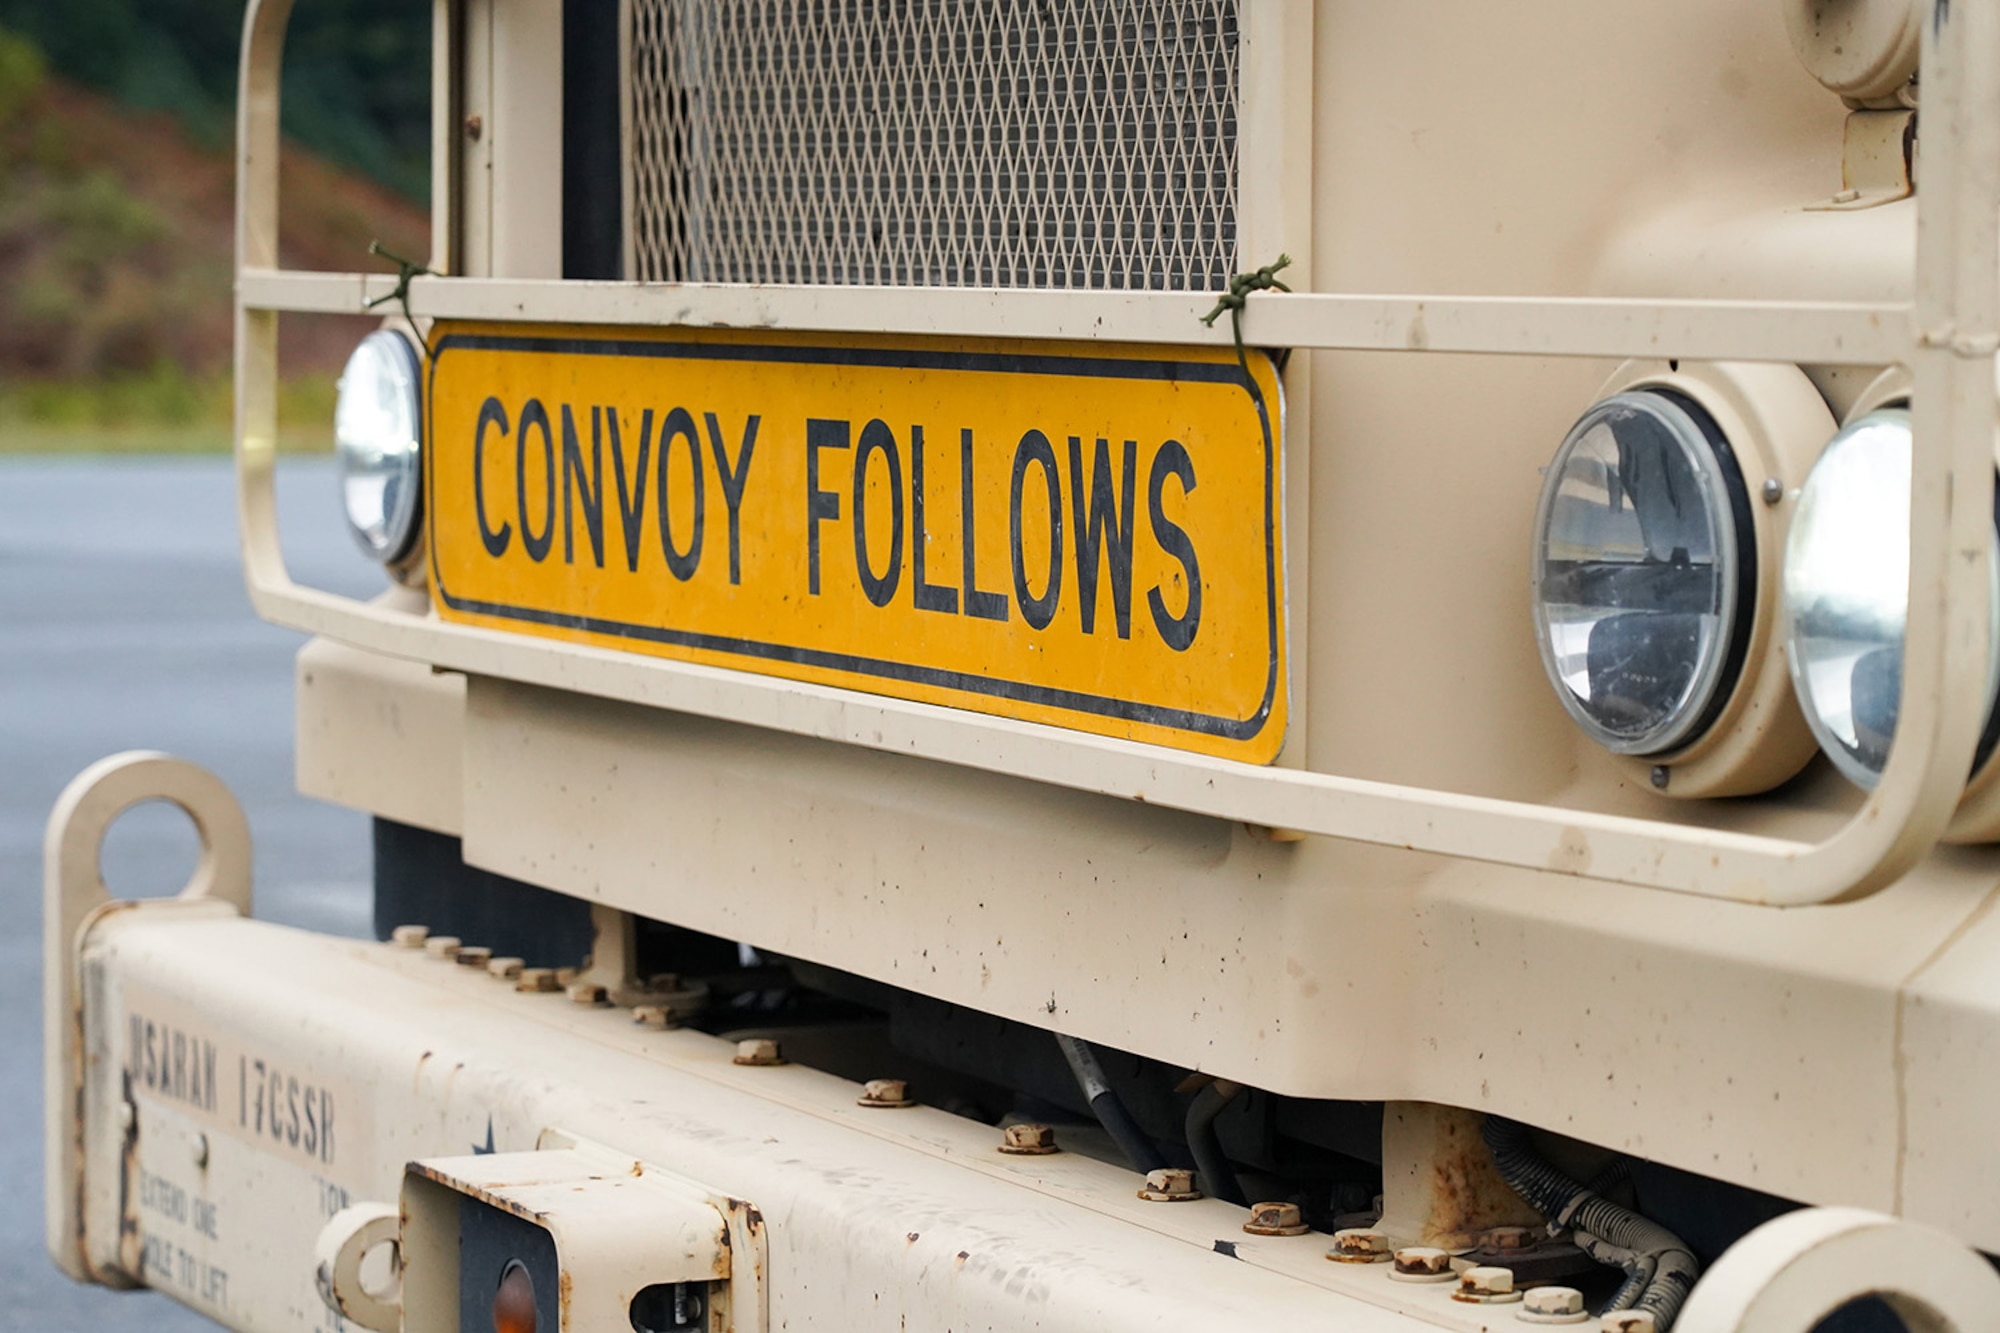 A ‘convoy follows’ sign is seen attached to the front of an M415A5 tractor during a rest stop as Soldiers assigned to the 109th Transportation Company, 17th Combat Support Sustainment Battalion, U.S. Army Alaska, drive through the Kenai Penninsula to load U.S. Marine Corps bulk fuel supplies and equipment from the U.S.S. Comstock (LSD-45), a Whidbey Island-class dock landing ship, at the port of Seward, Alaska, Sept. 19, 2019, for transport to Joint Base Elmendorf-Richardson, Alaska. The U.S. Navy is conducting an Arctic Expeditionary Capabilities Exercise to test its logistical effectiveness and joint-service interoperability while responding to conflict or disaster in an austere environment with no organic assets.